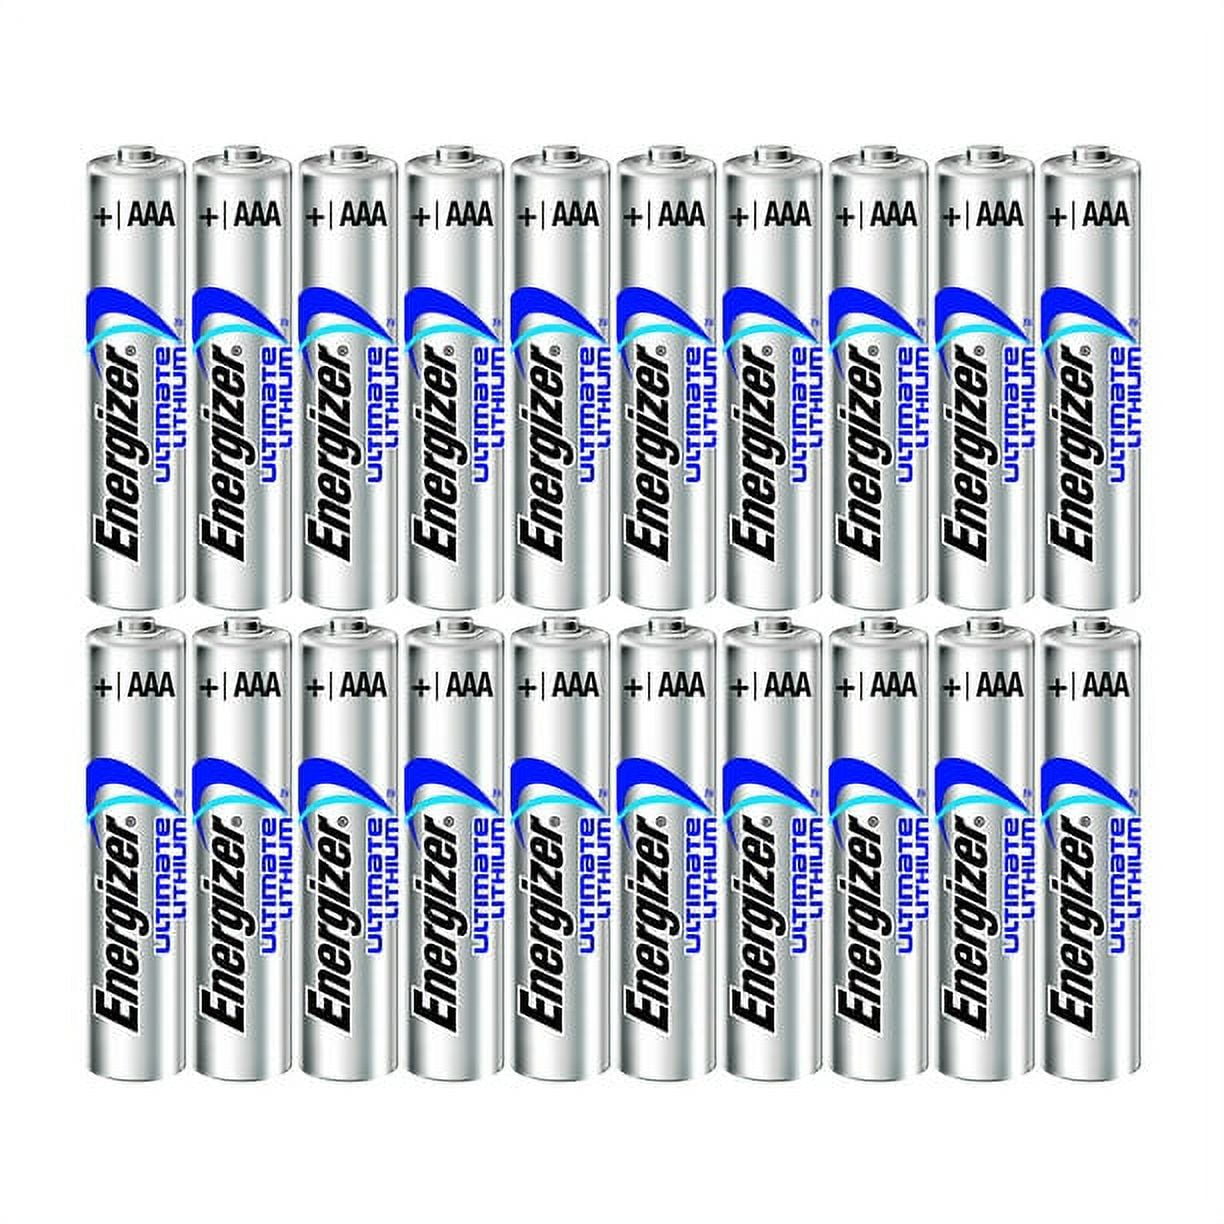 Energizer Ultimate Lithium AA Battery Review - Consumer Reports